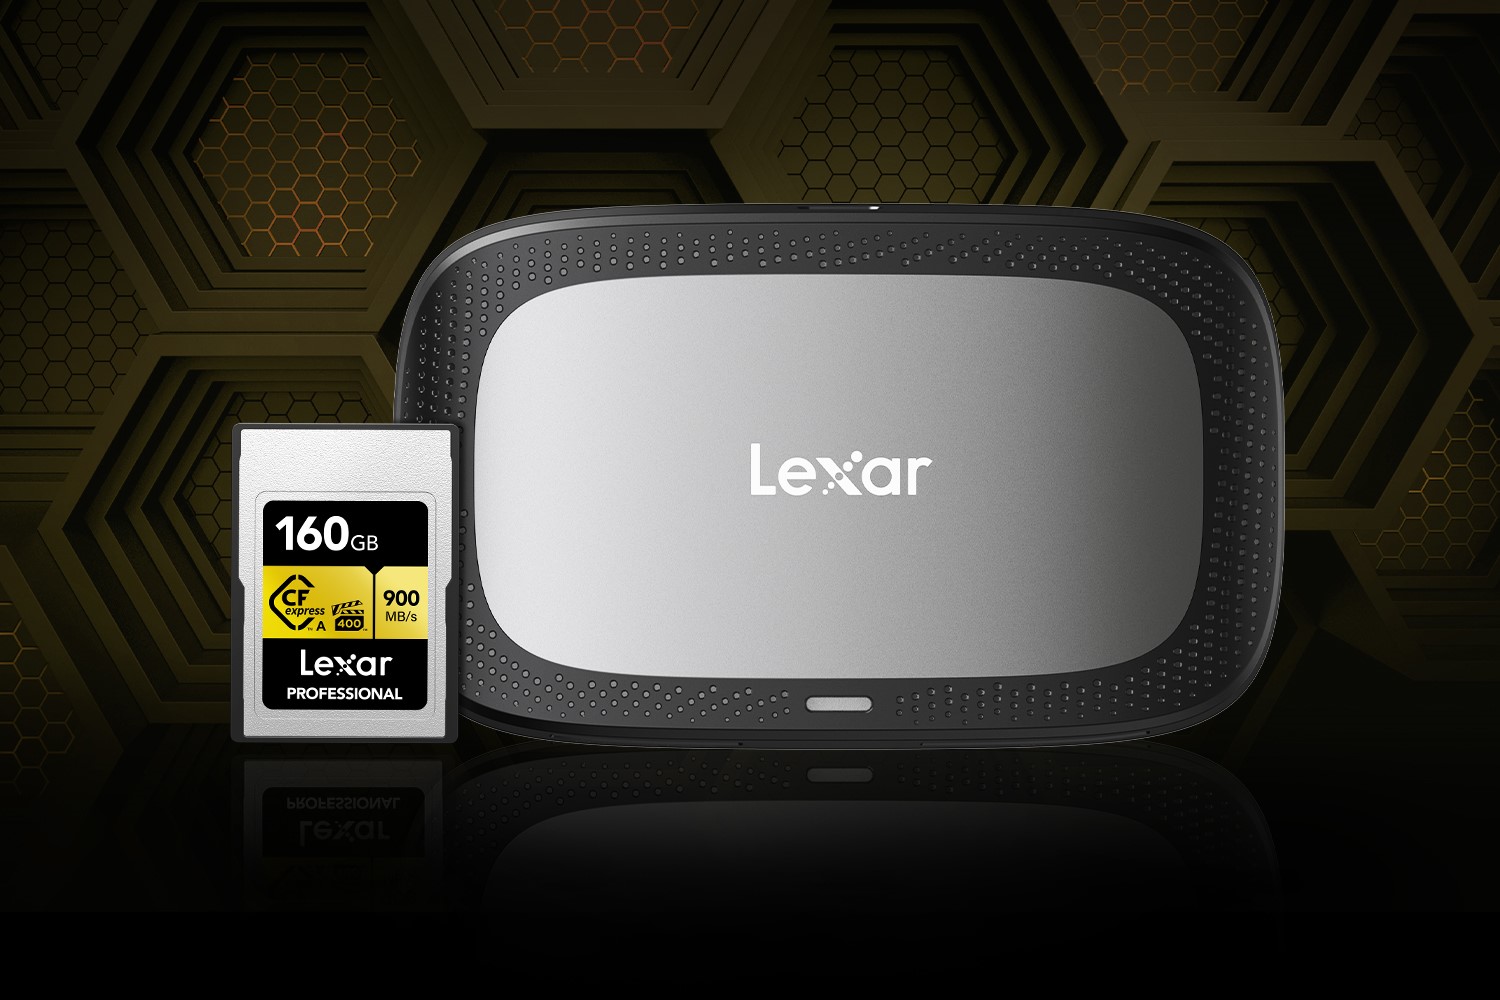 LEXAR ANNOUNCES THE WORLD’S FASTEST CFEXPRESS™ TYPE A CARD GOLD SERIES AND CFEXPRESS™ TYPE A/SD™ CARD READER